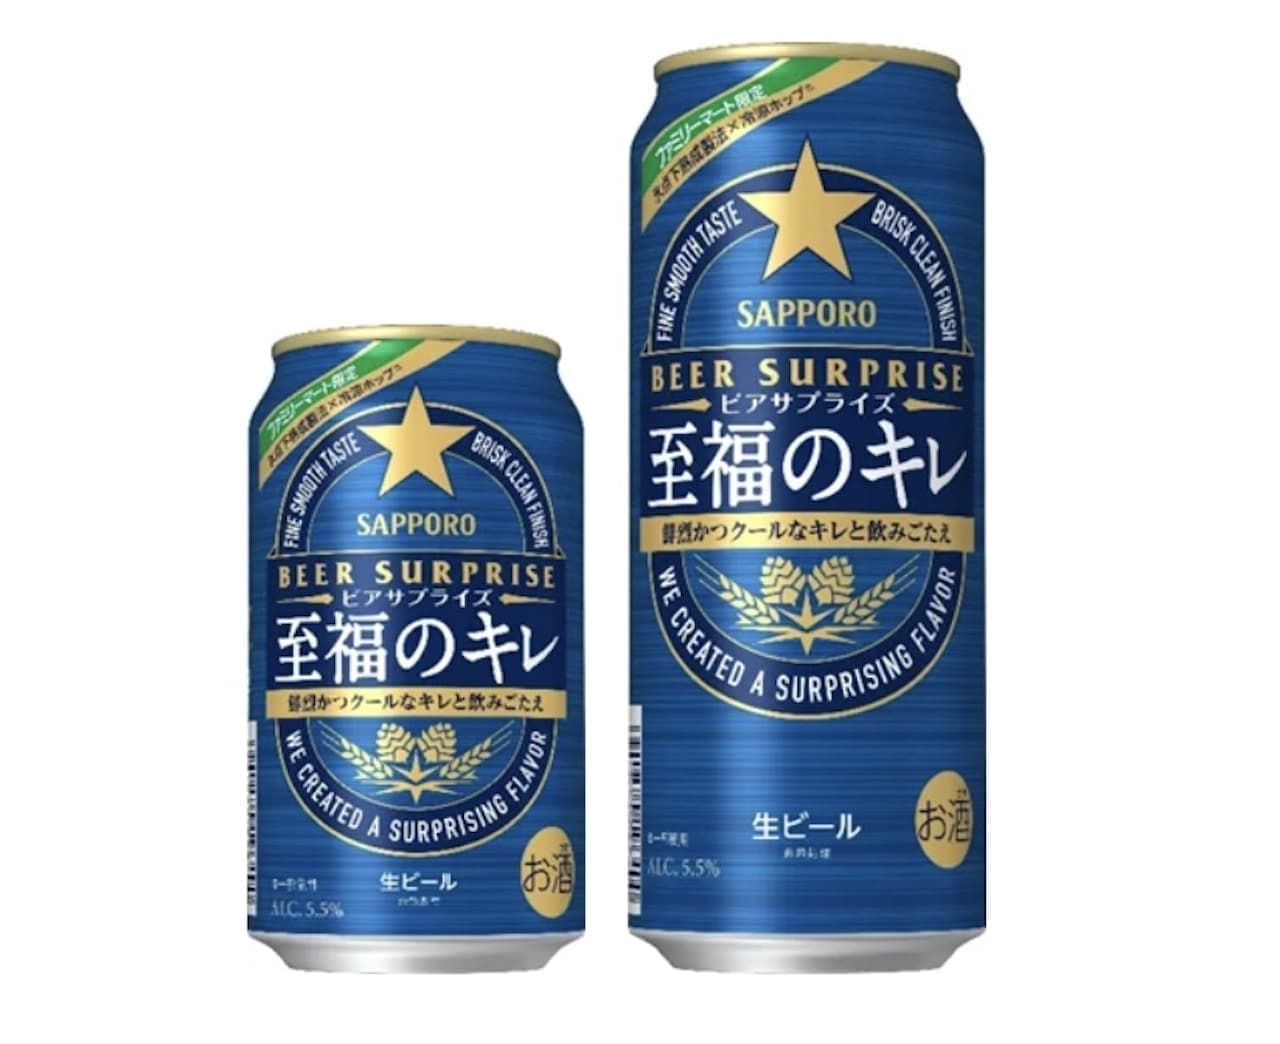 Famima "Sapporo Beer Surprise Blissful Kire